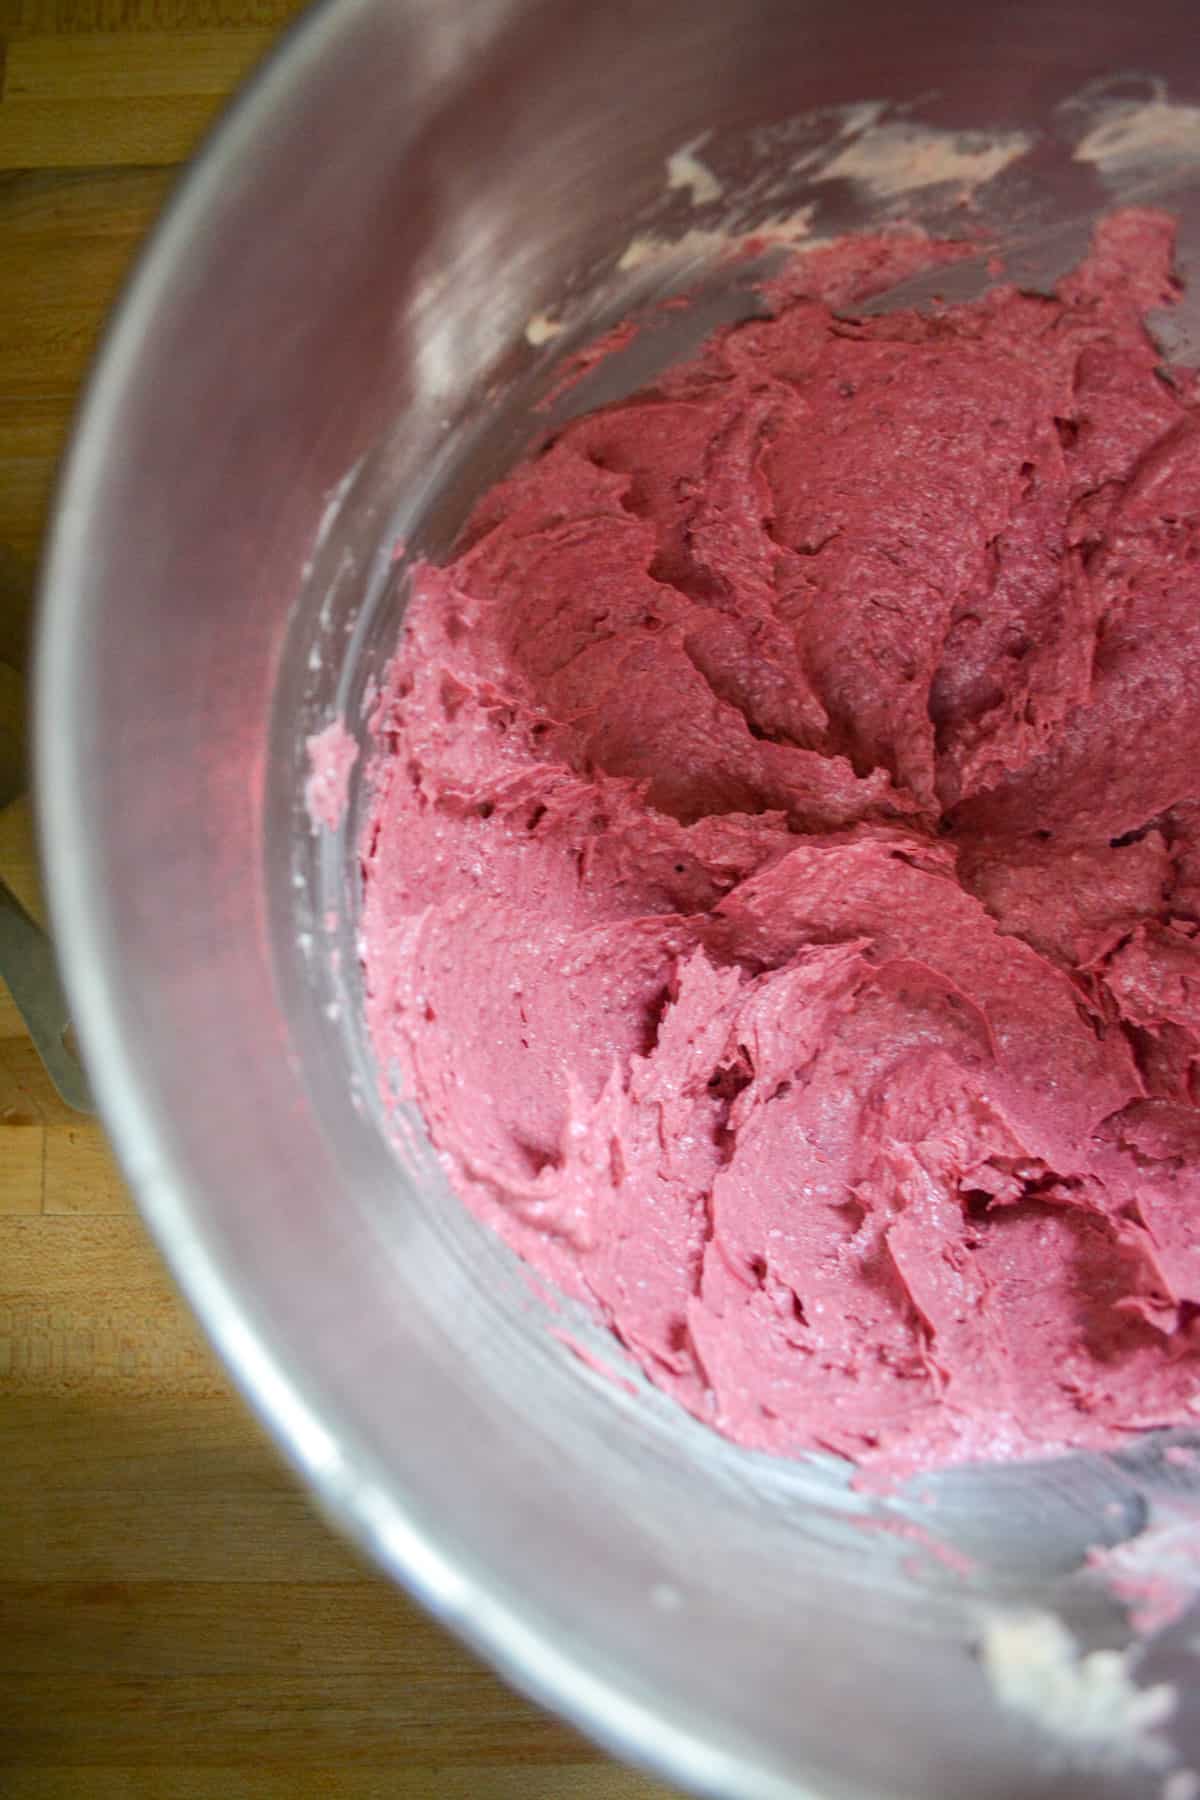 freeze-dried raspberries and vegan butter in the bowl of a stand mixer.